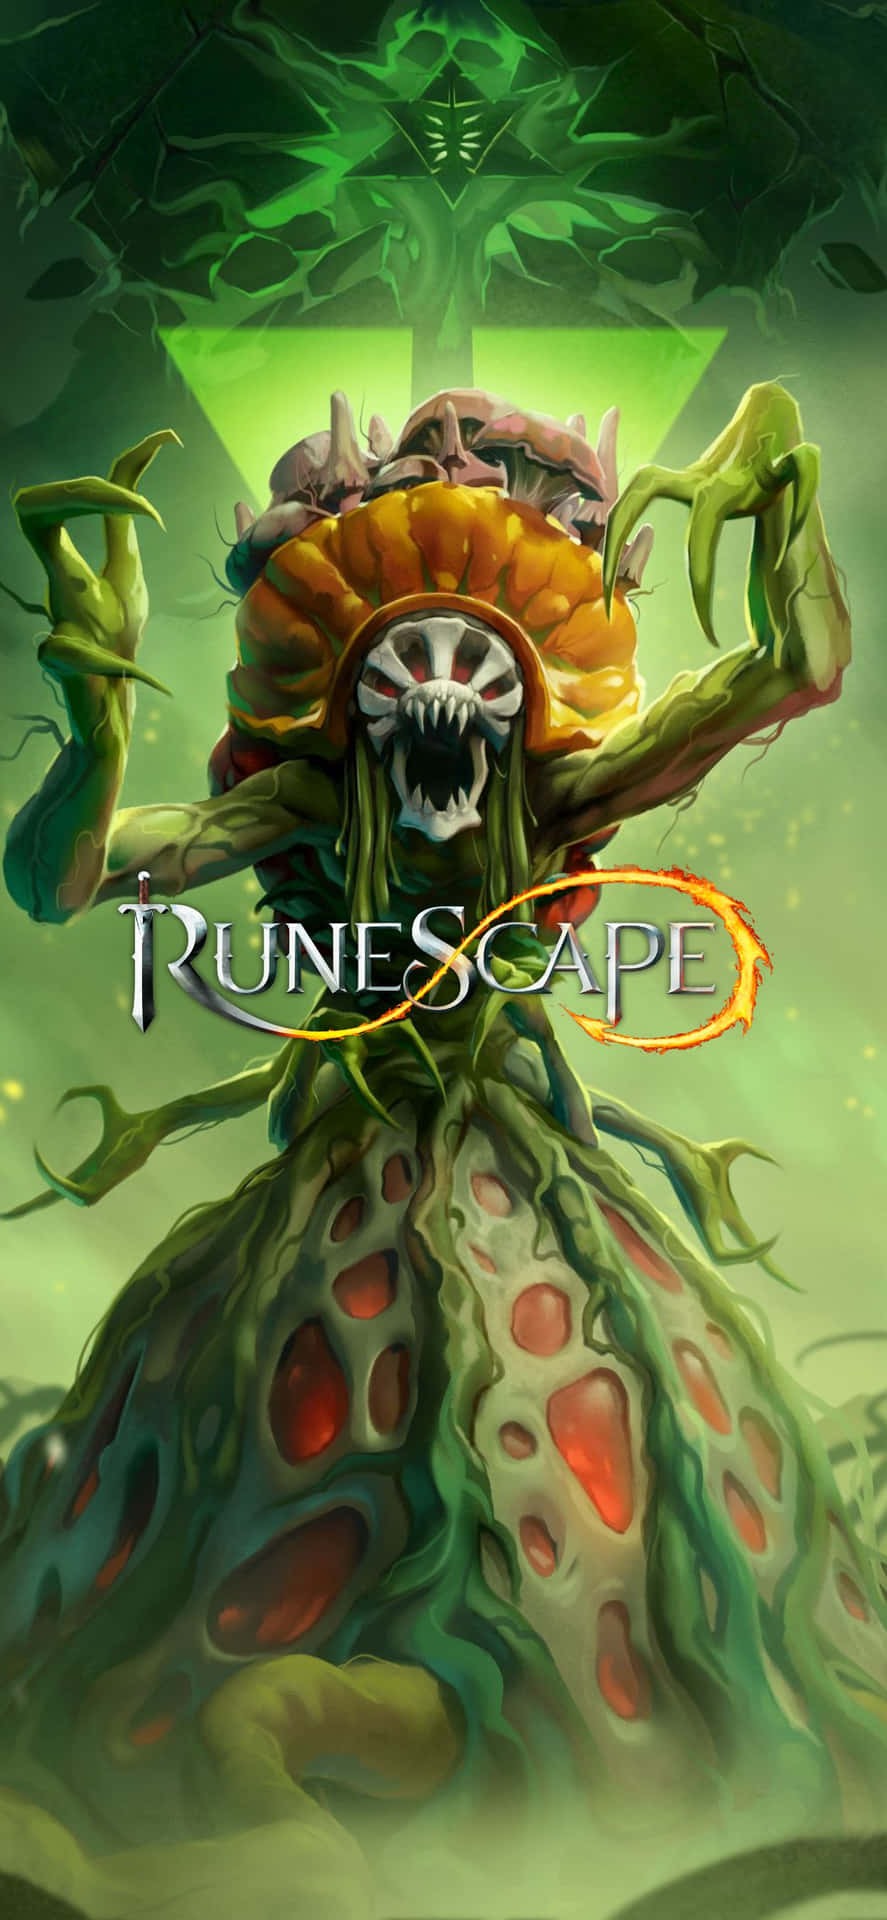 "Taking a Break from the Adventure? Play Runescape on your IPhone Xs Max!"